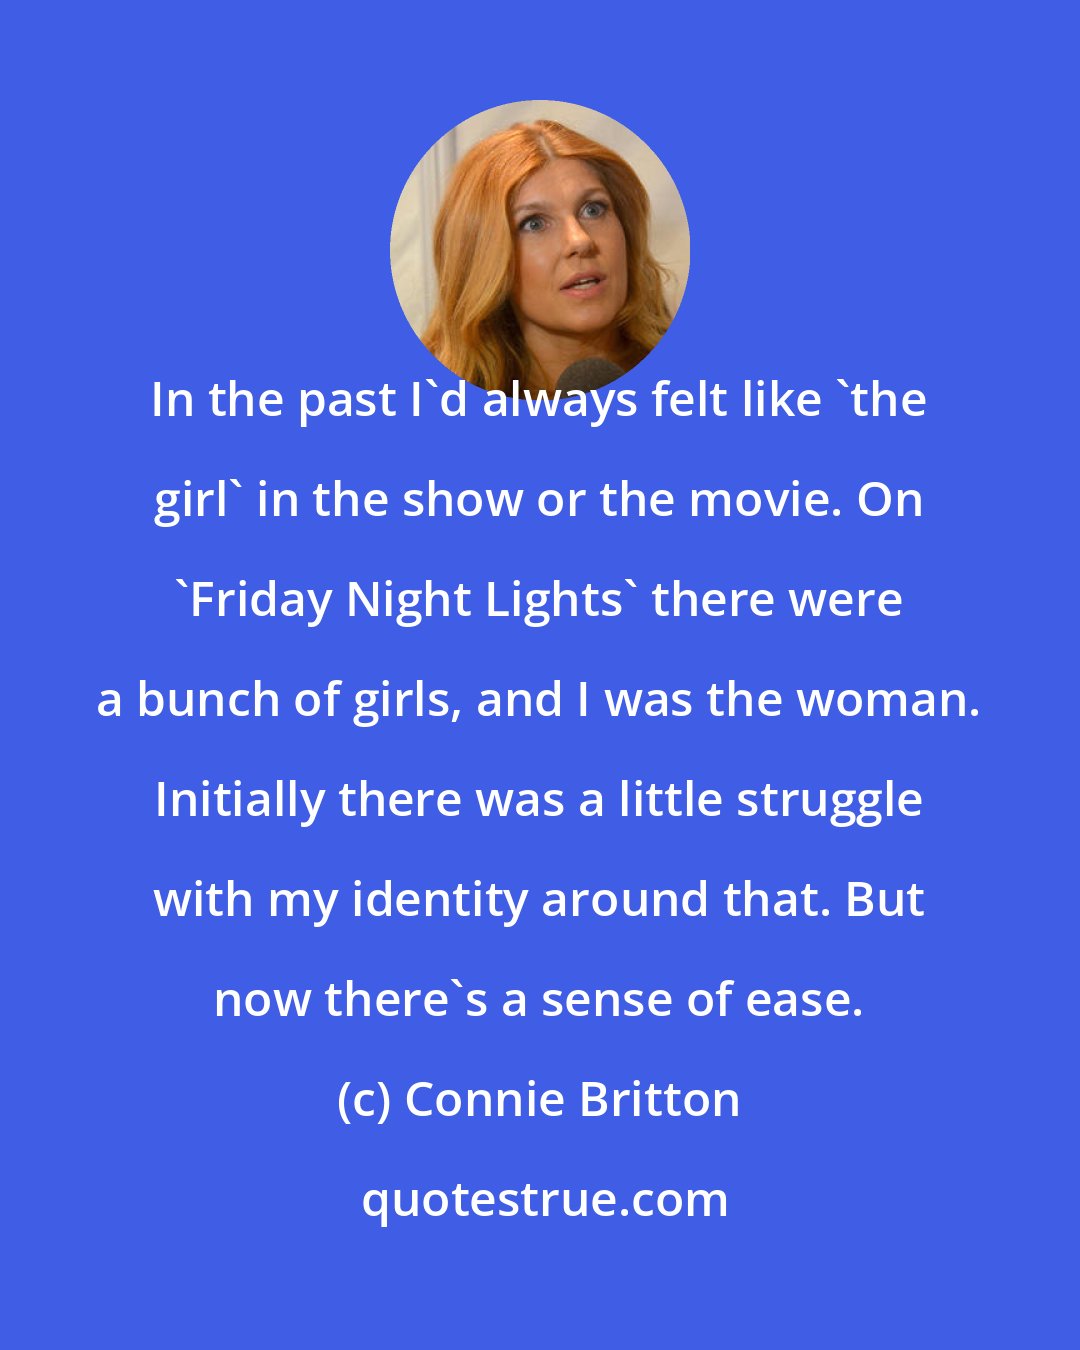 Connie Britton: In the past I'd always felt like 'the girl' in the show or the movie. On 'Friday Night Lights' there were a bunch of girls, and I was the woman. Initially there was a little struggle with my identity around that. But now there's a sense of ease.